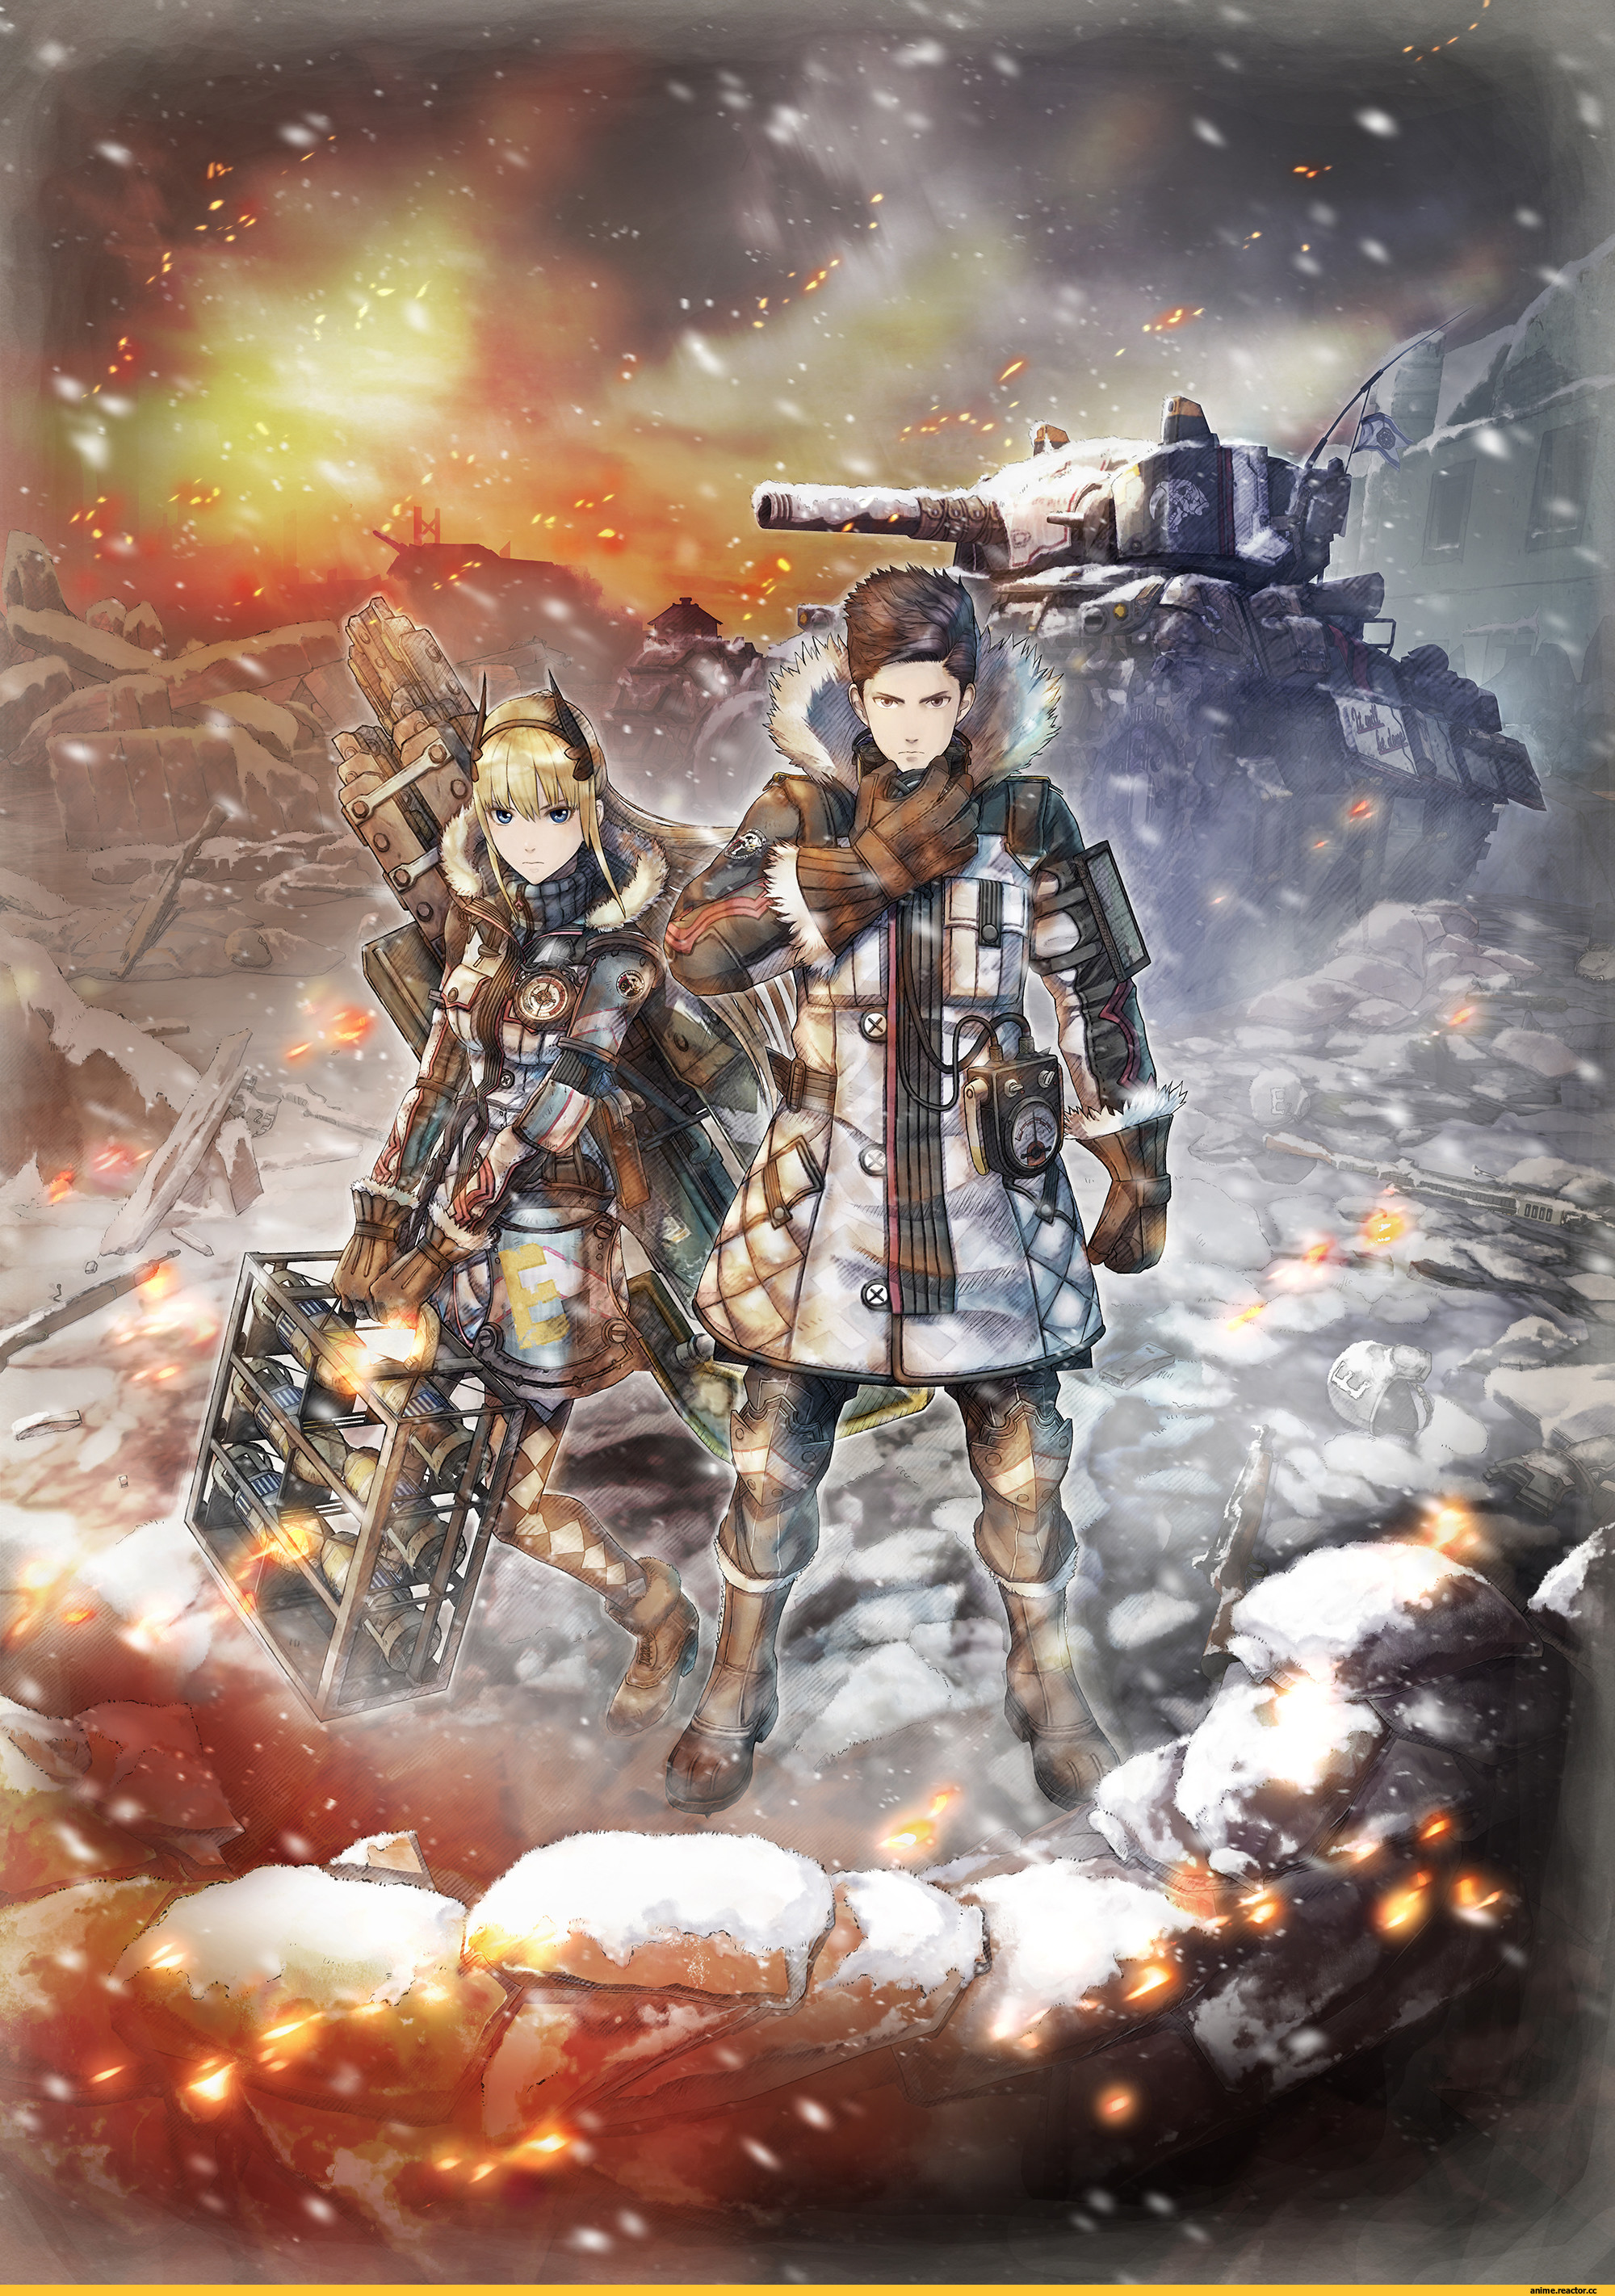 2000x2843 Nintendo Switch images Valkyria Chronicles 4 HD wallpaper and background  photos